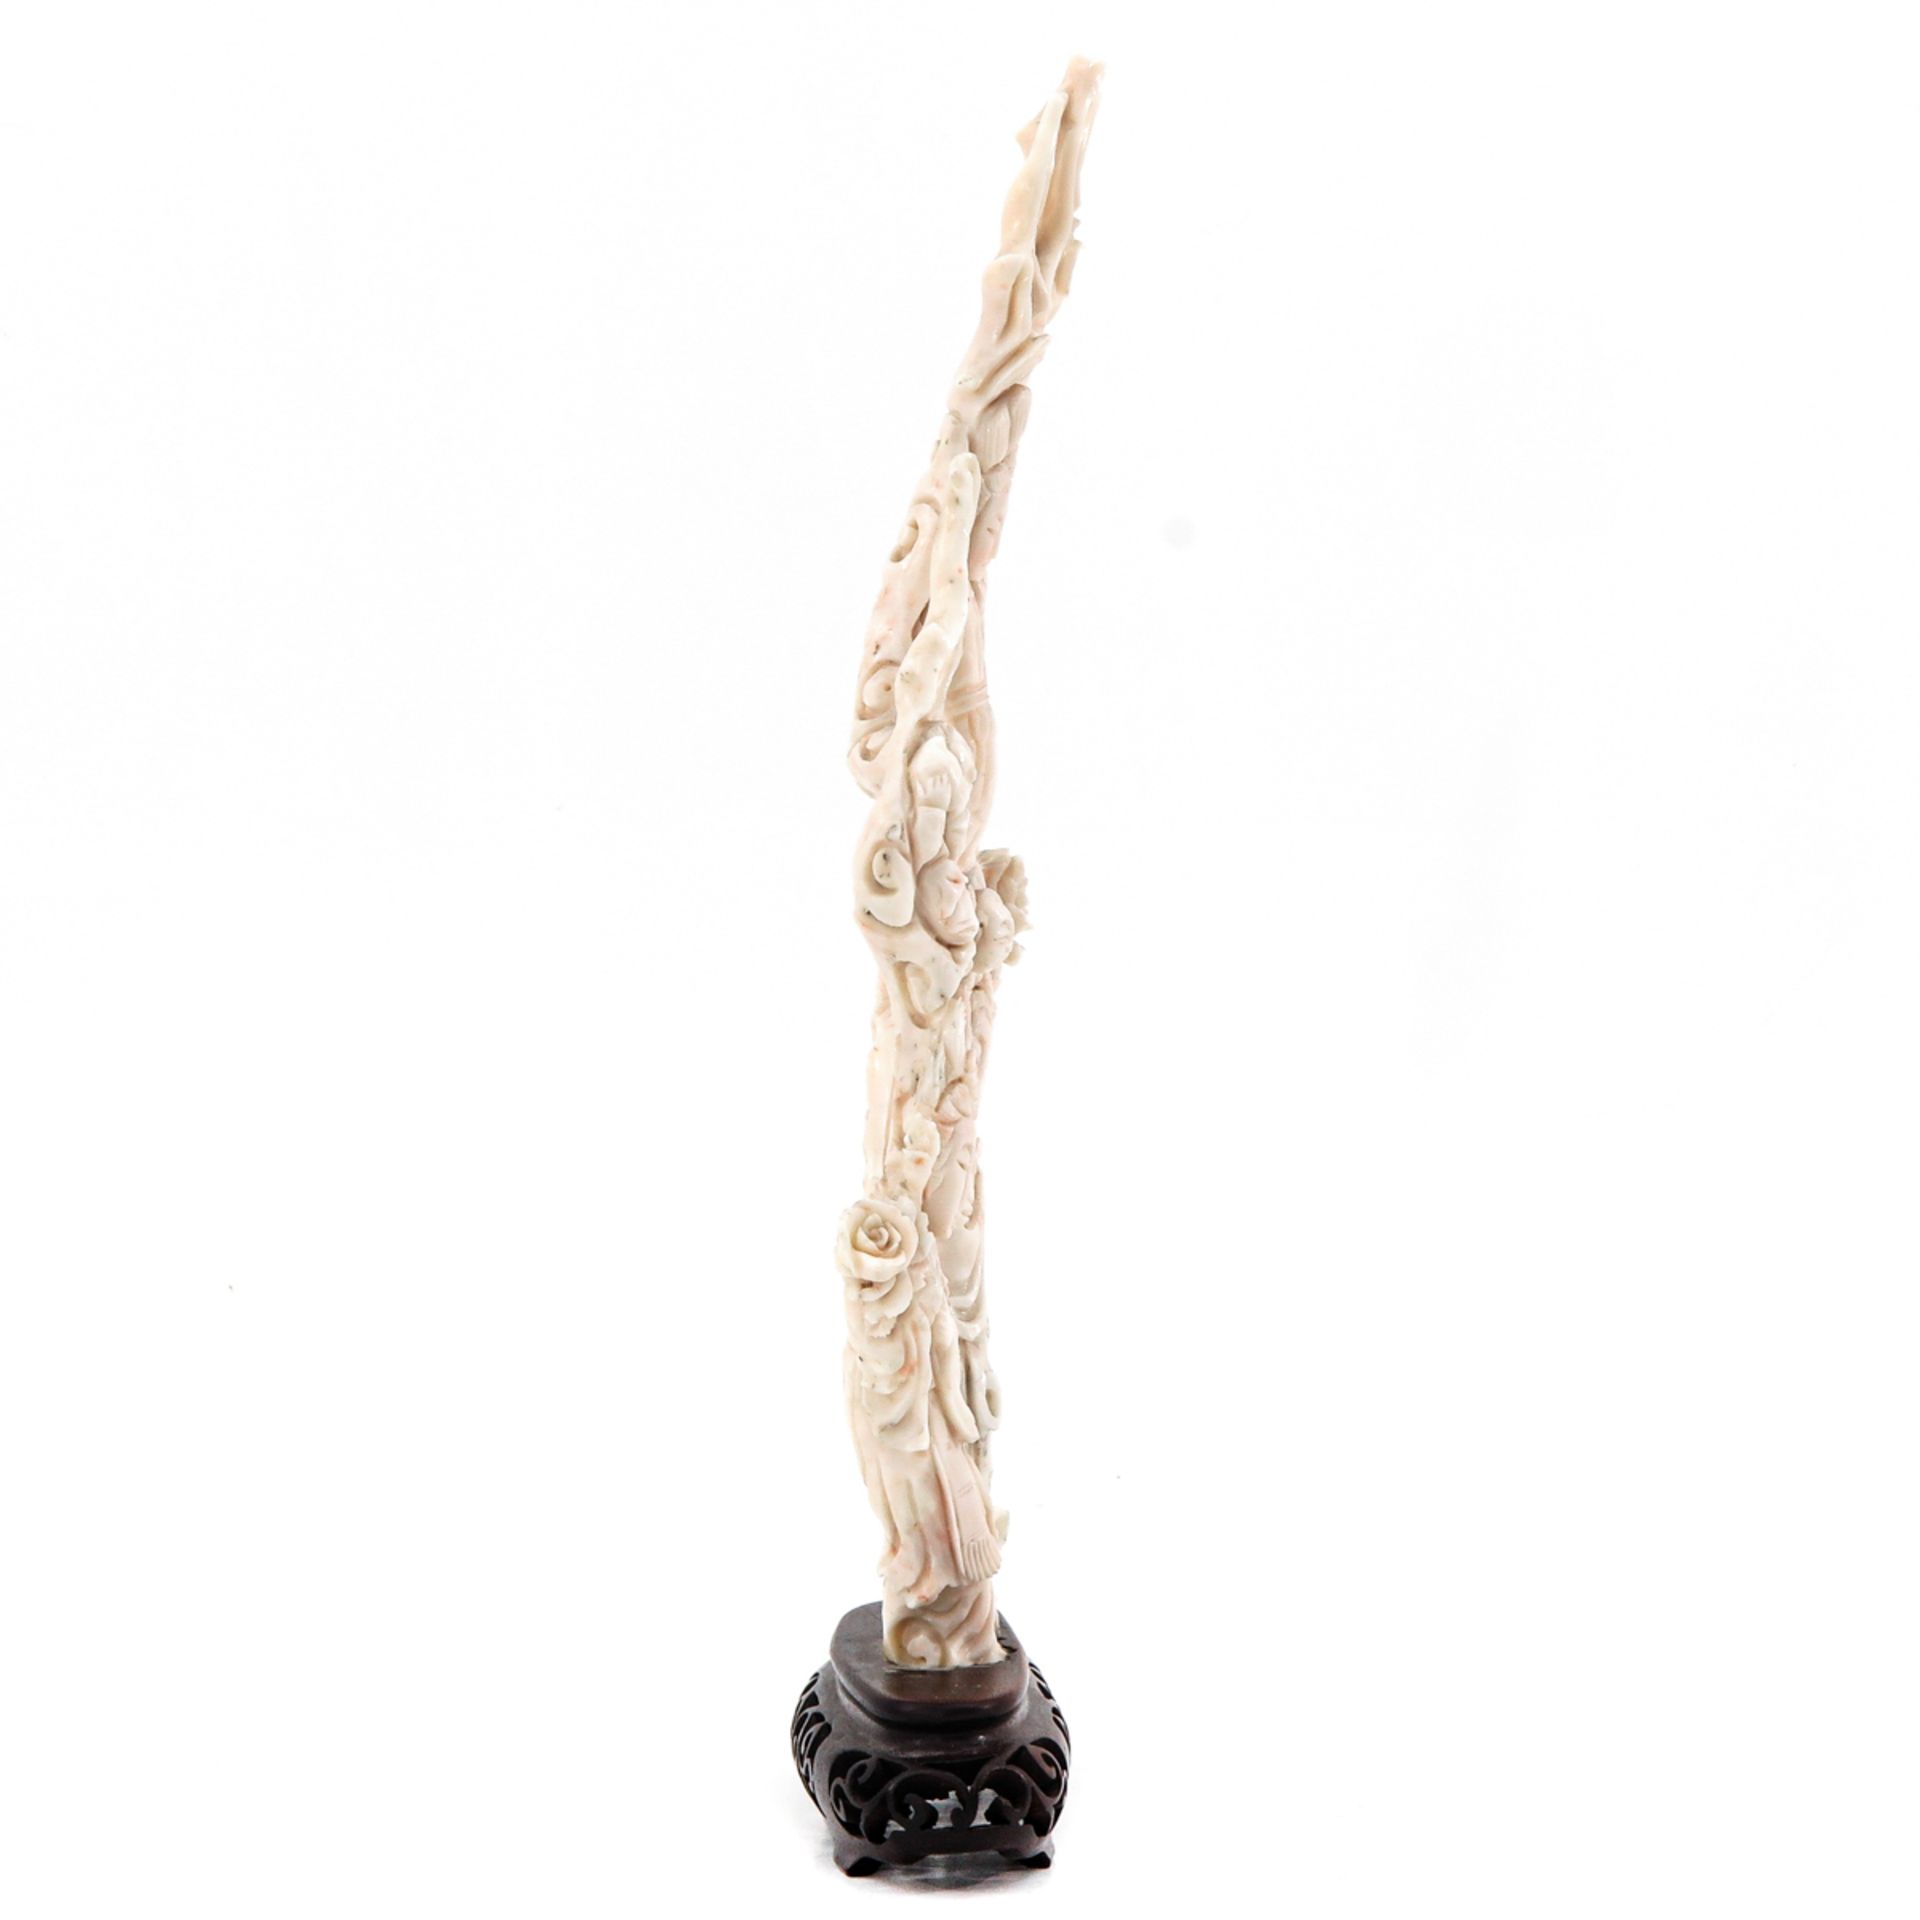 A White Coral Sculpture - Image 4 of 10